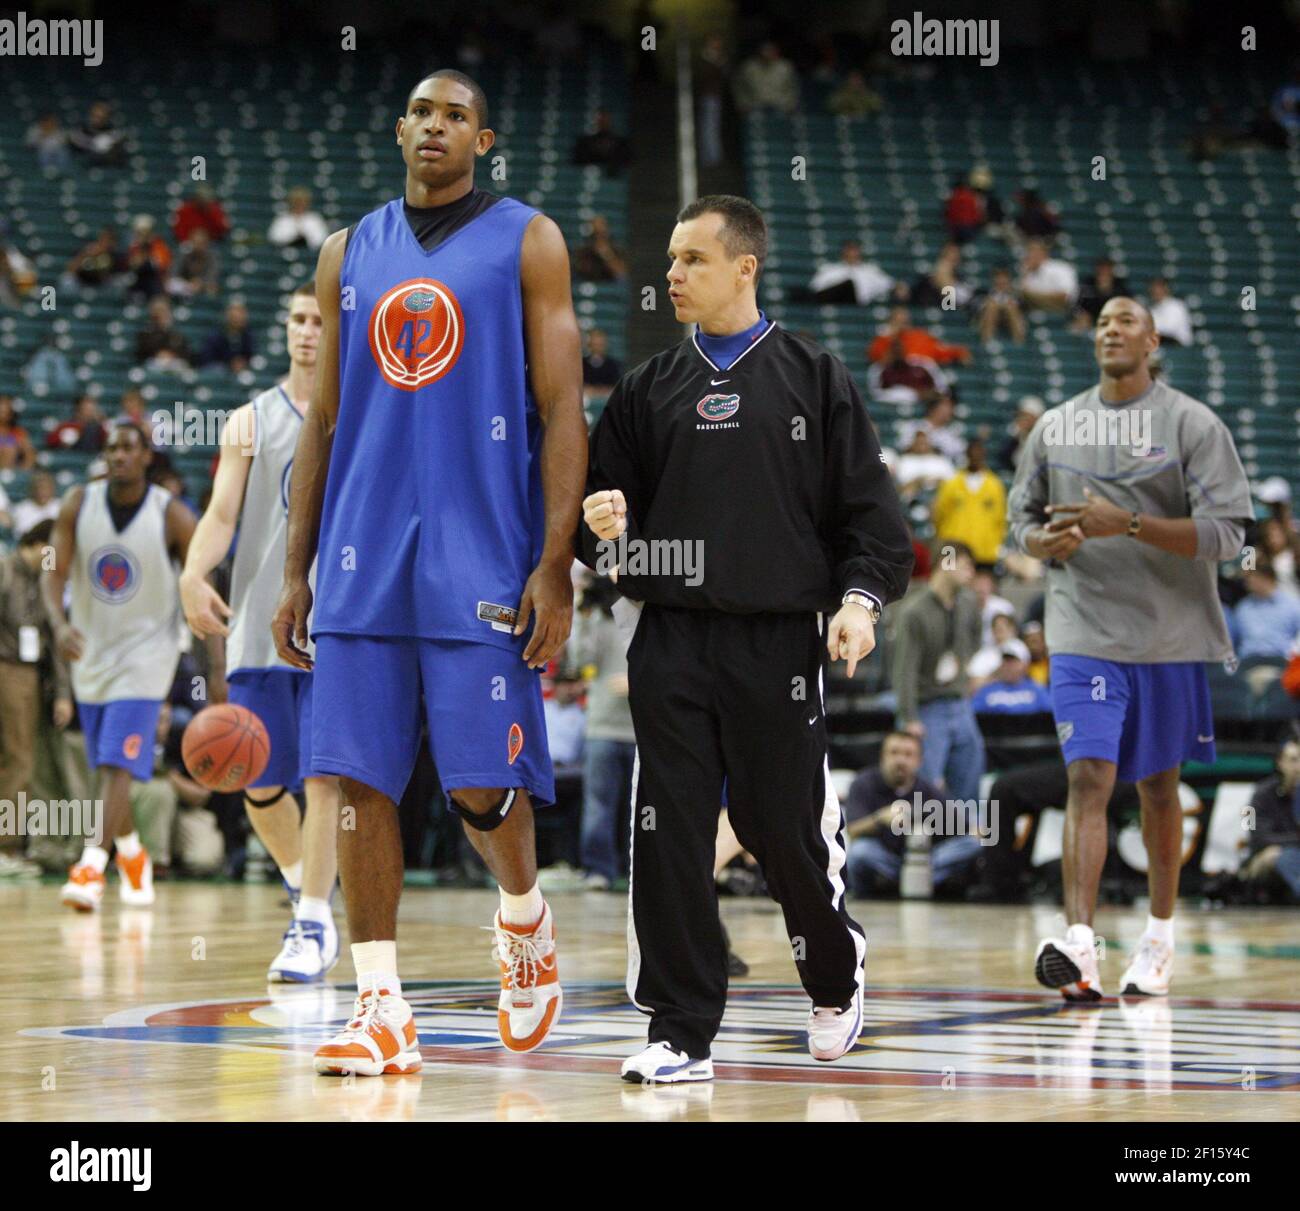 Florida head coach Billy Donovan walks with Al Horford during the team's practice session for the NCAA Men's Basketball Championship on Friday, March 30, 2007, in the Georgia Dome in Atlanta, Georgia. (Photo by Jim Prisching/Chicago Tribune/MCT/Sipa USA) Stock Photo